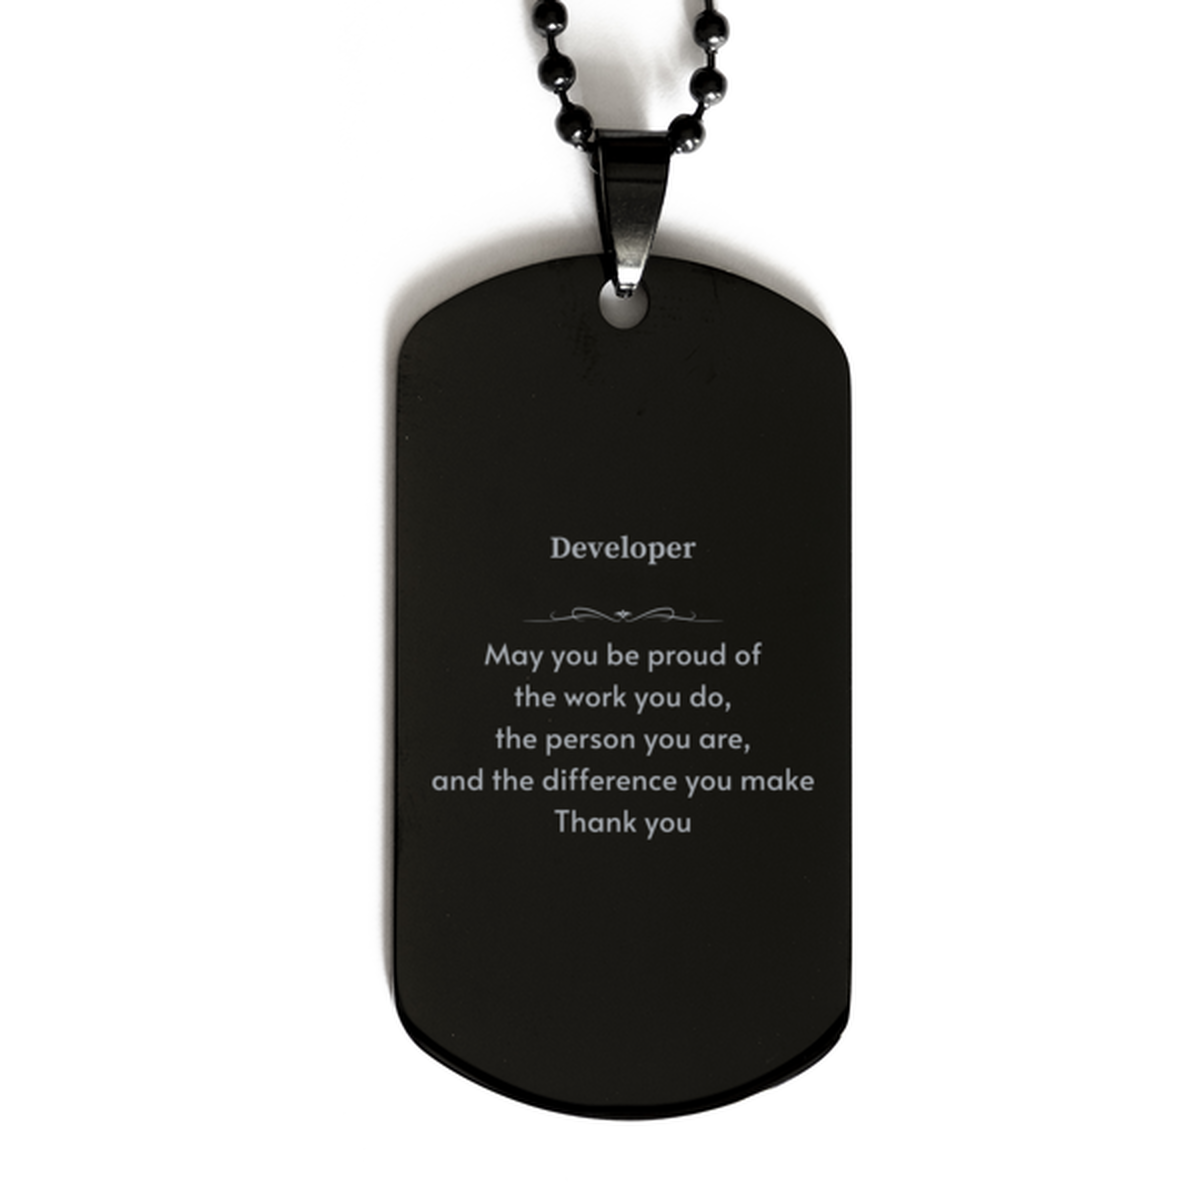 Heartwarming Black Dog Tag Retirement Coworkers Gifts for Developer, Developer May You be proud of the work you do, the person you are Gifts for Boss Men Women Friends